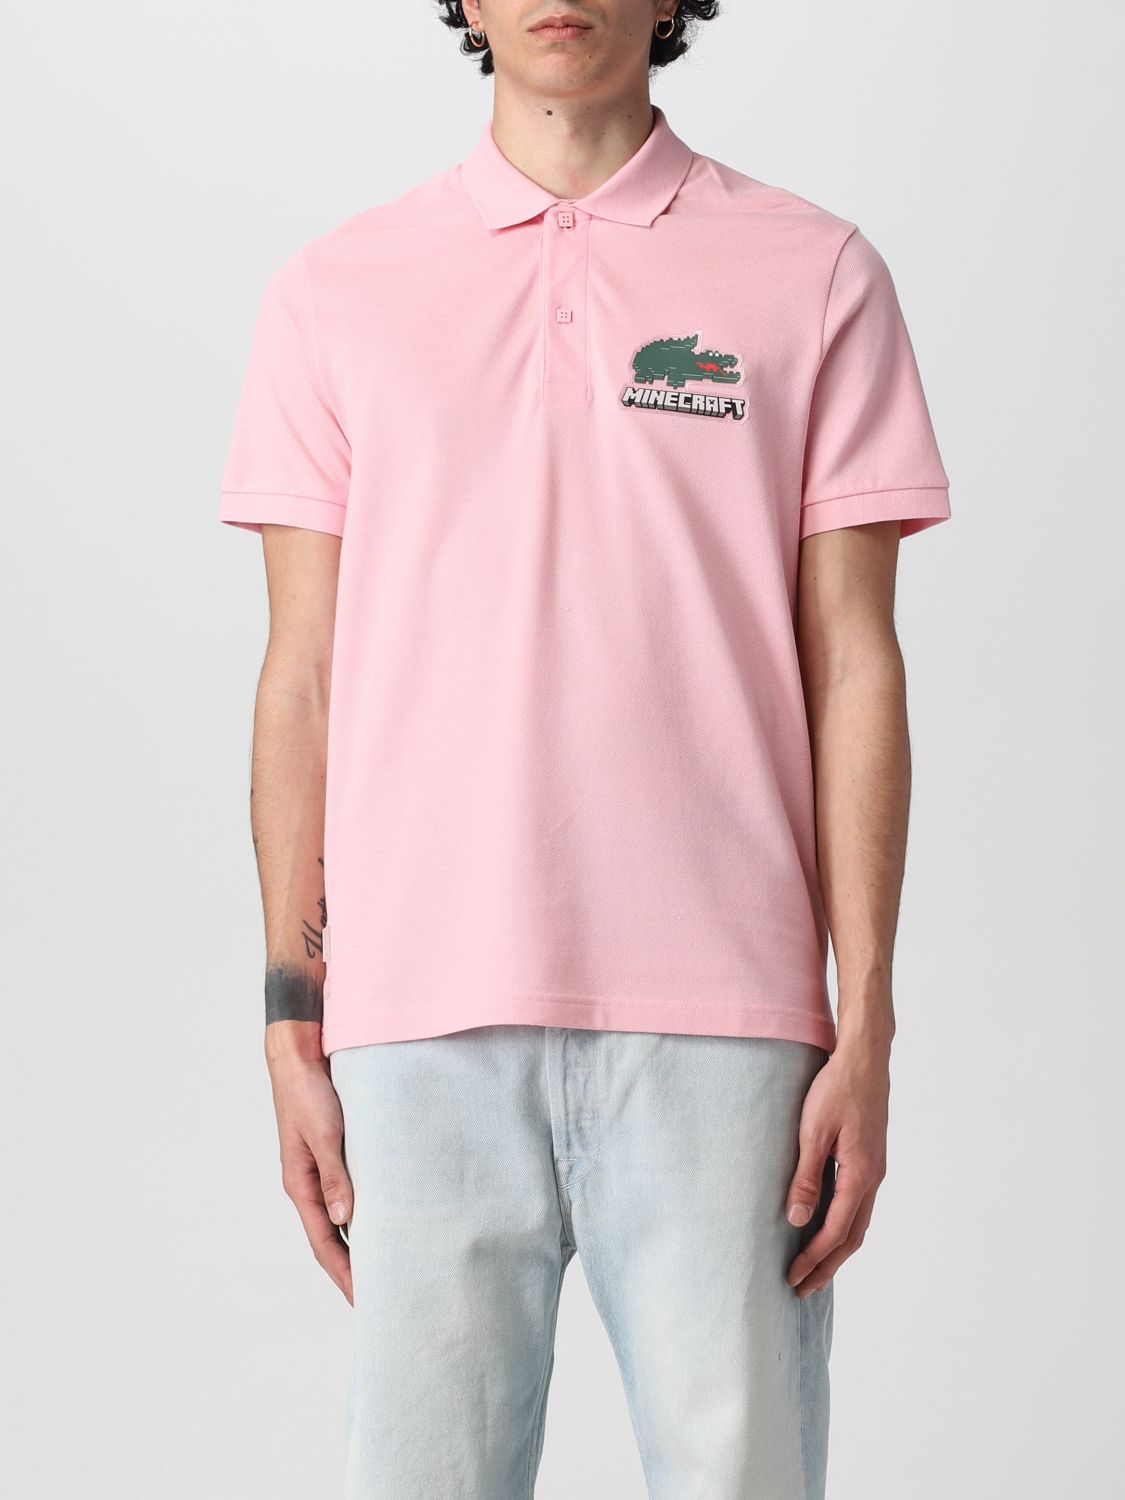 Lacoste X Minecraft Organic Cotton Polo Tshirt In Pink Modesens